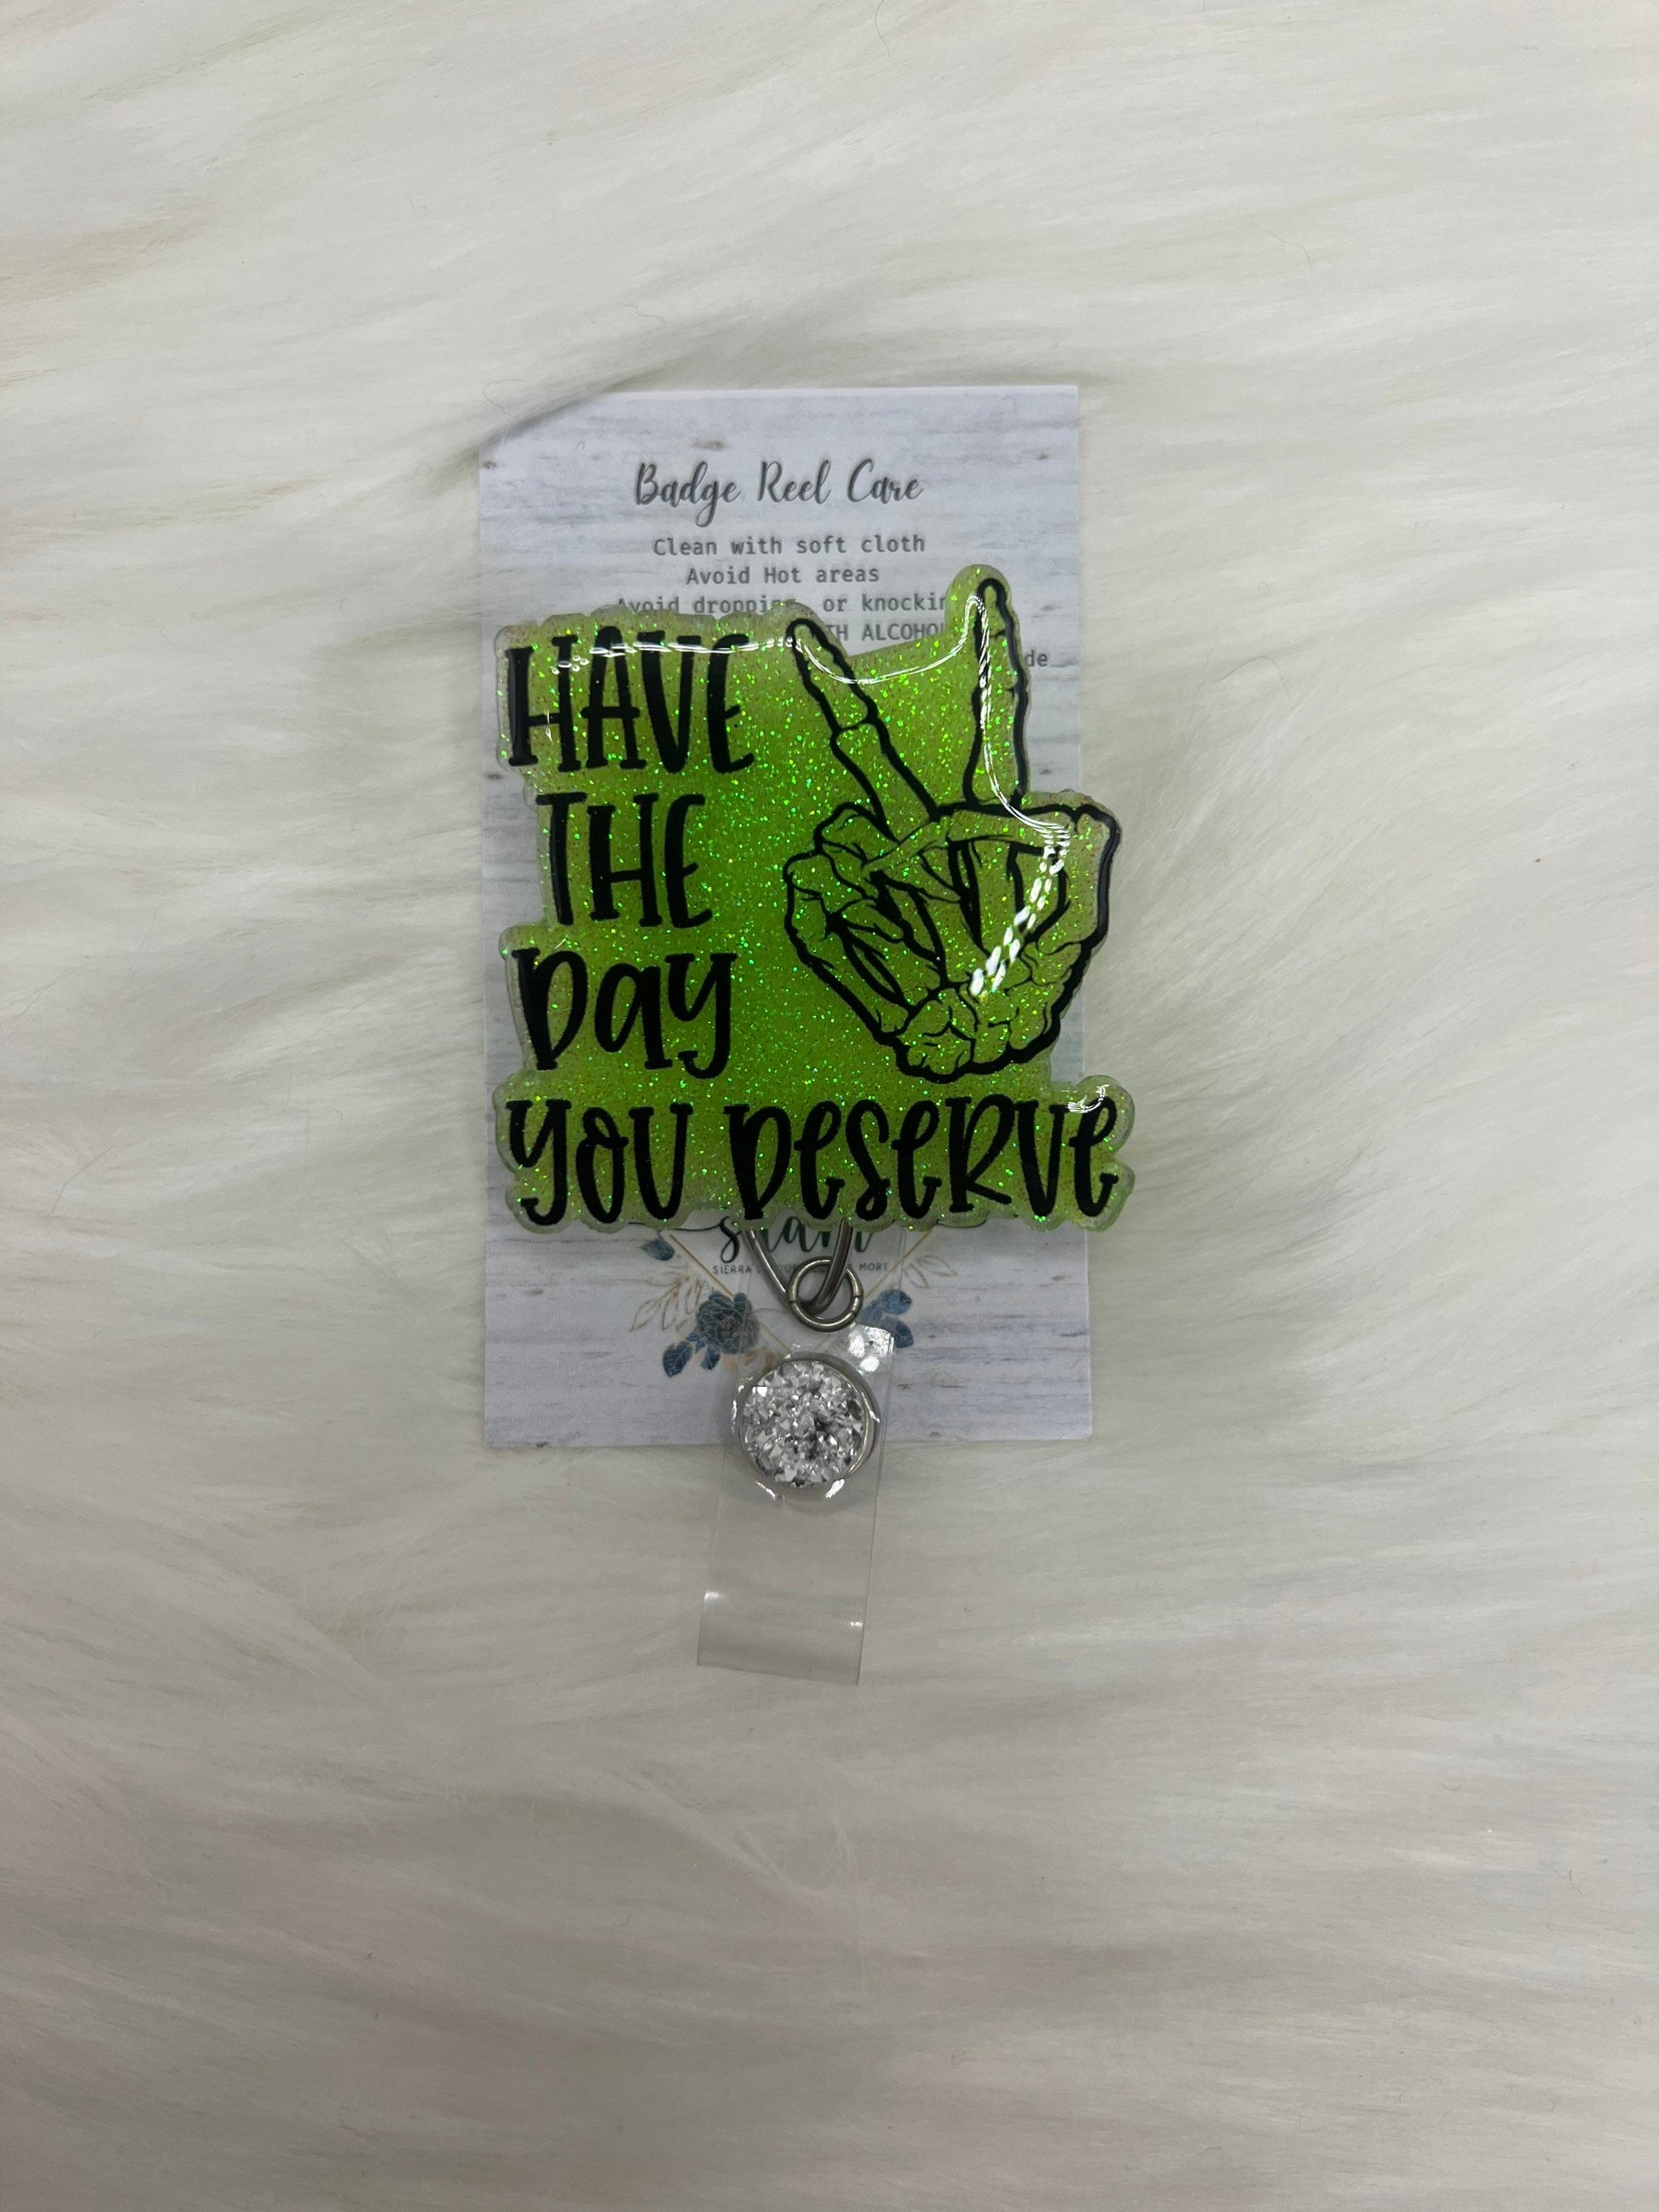 Have the day you deserve badge reel- funny badge- nurse gifts- cna gifts- healthcare gifts- mri safe- lanyard- personalized badge